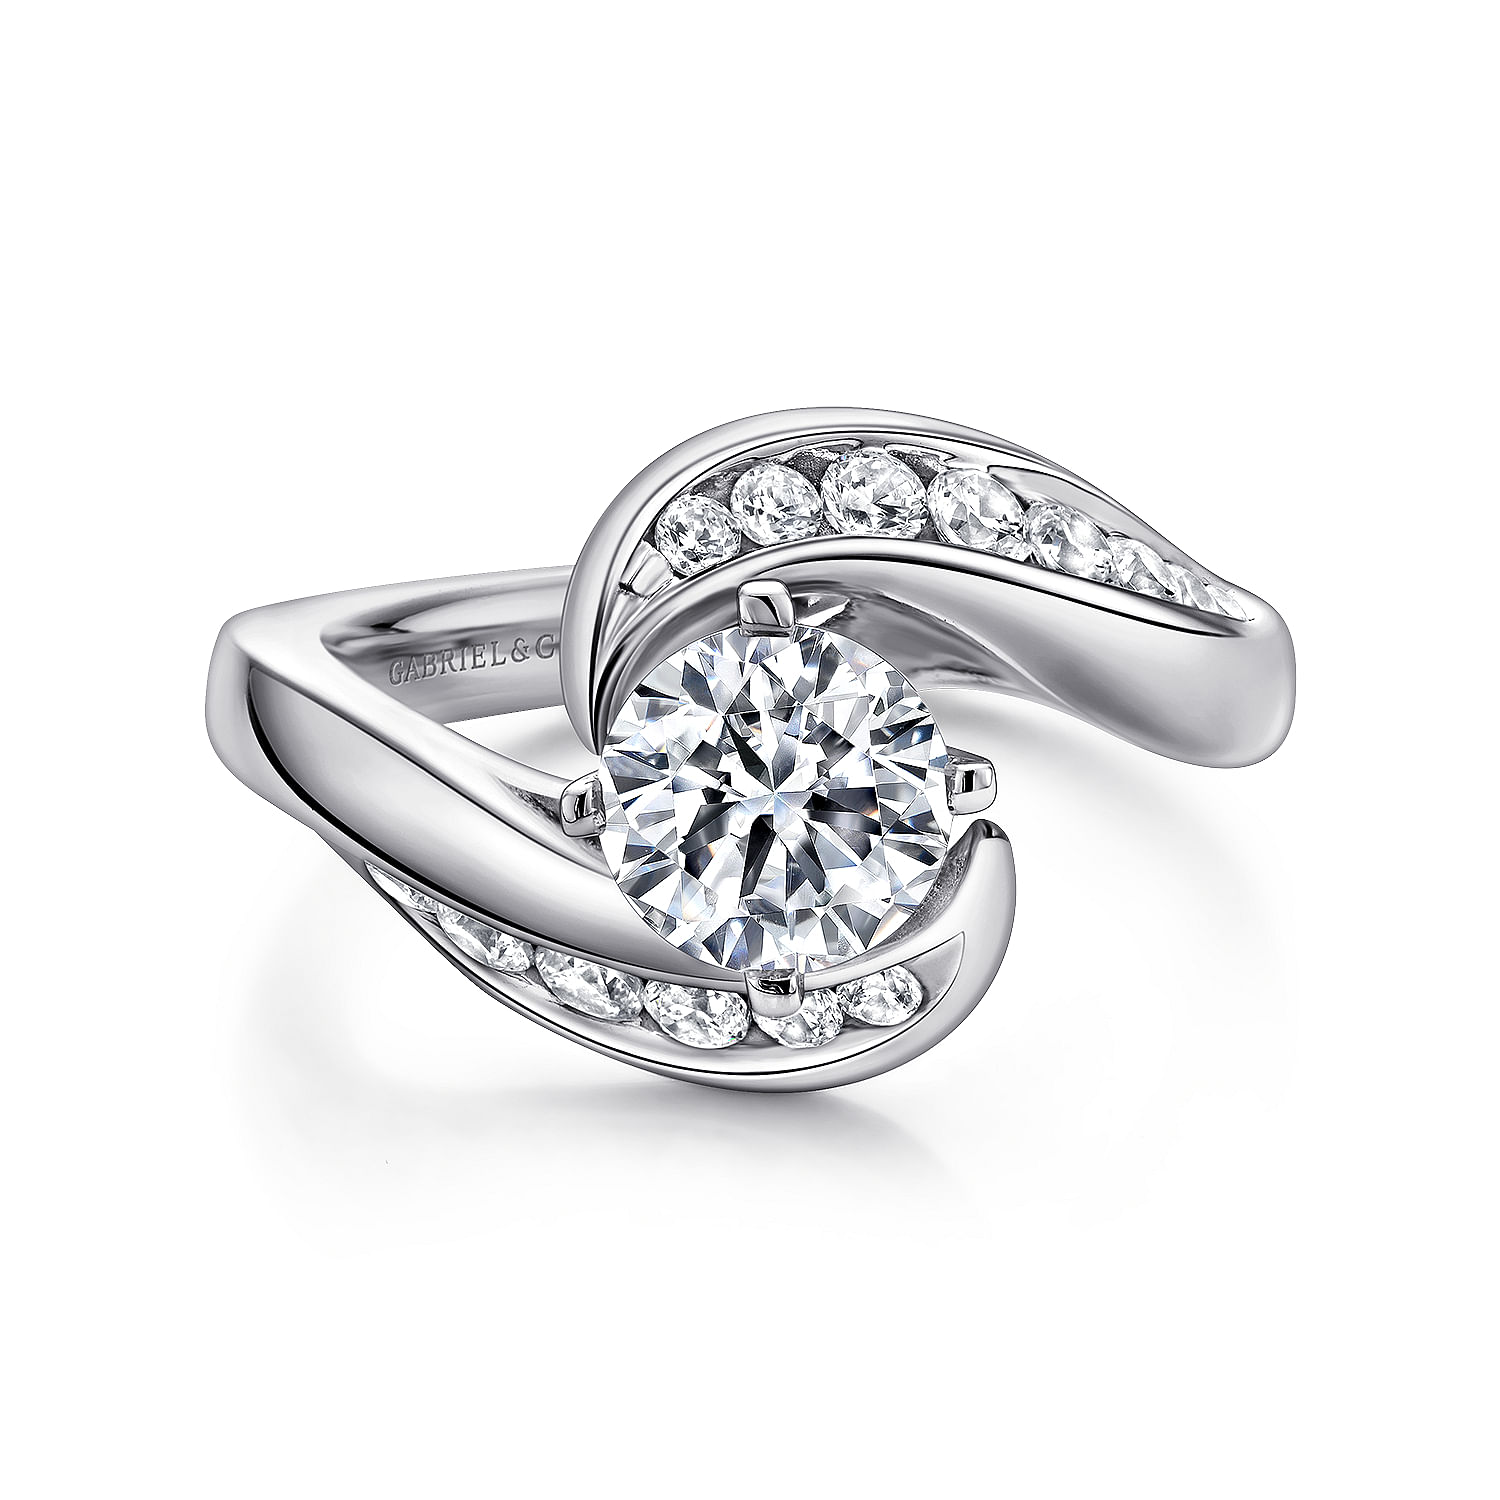 Hayley---14K-White-Gold-Round-Bypass-Diamond-Channel-Set-Engagement-Ring1